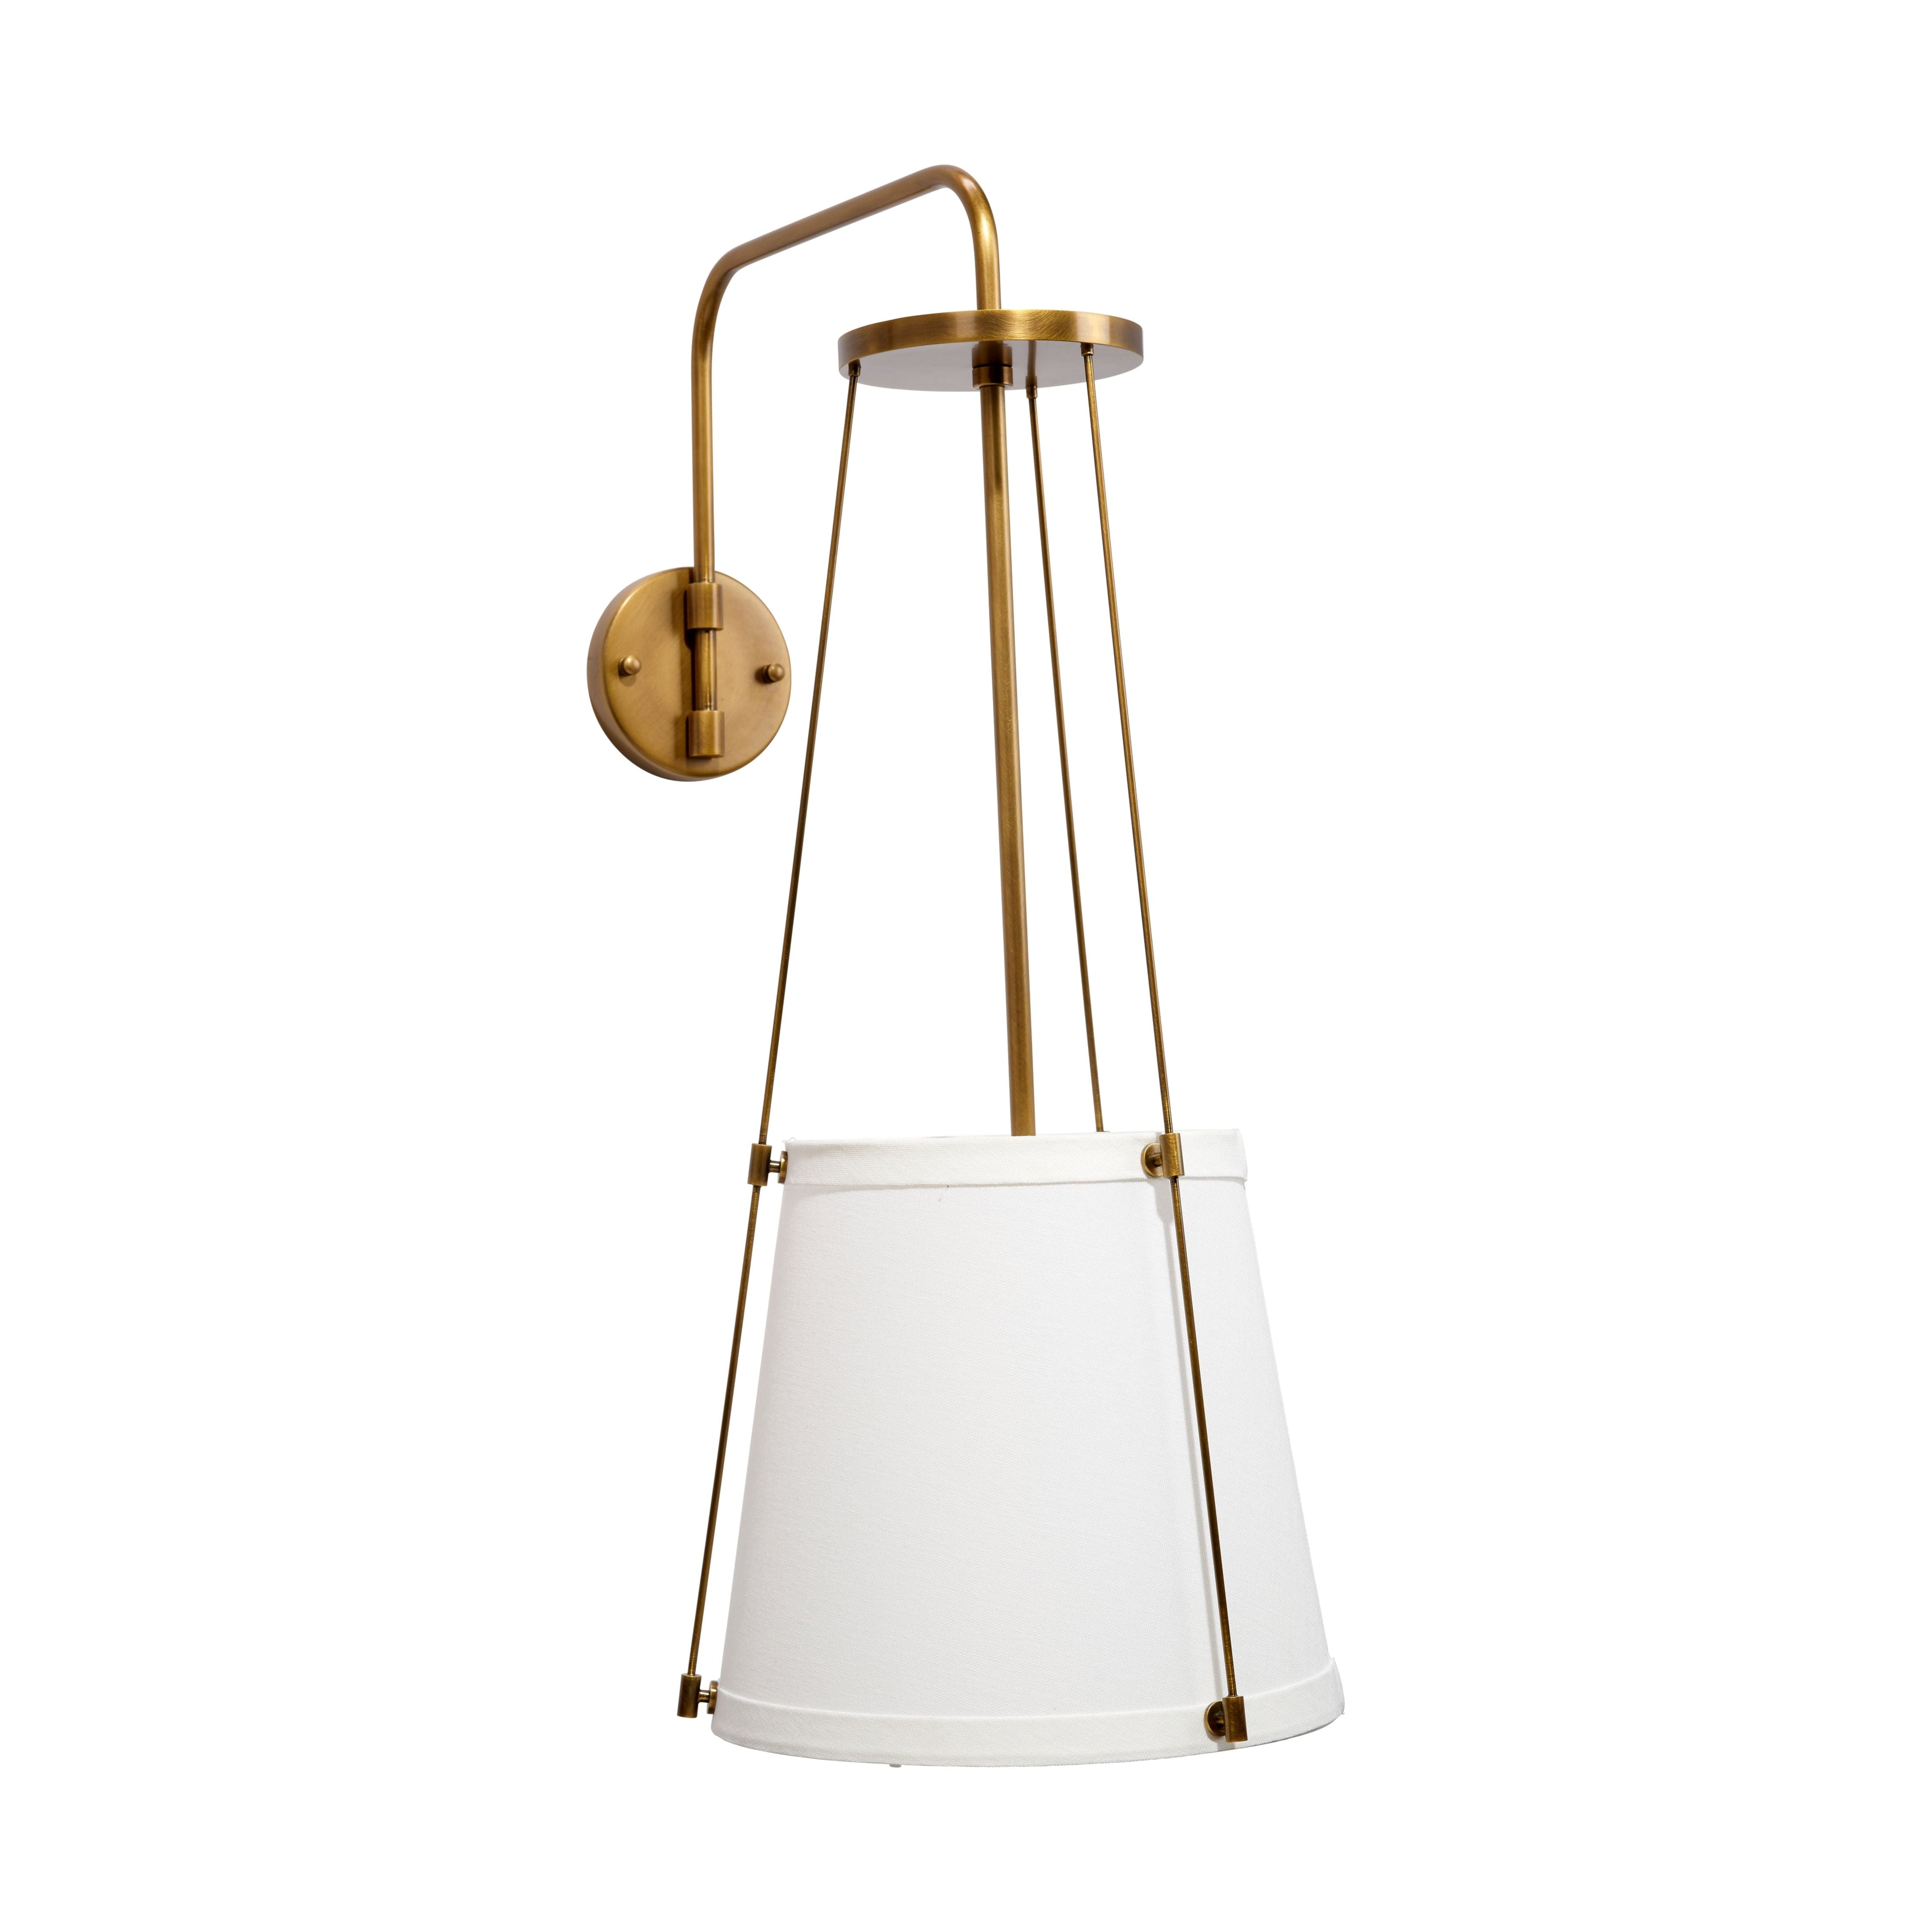 Jamie Young Company - 4CALI-ABOW -  California Wall Sconce - California - Antique Brass and Off White Linen